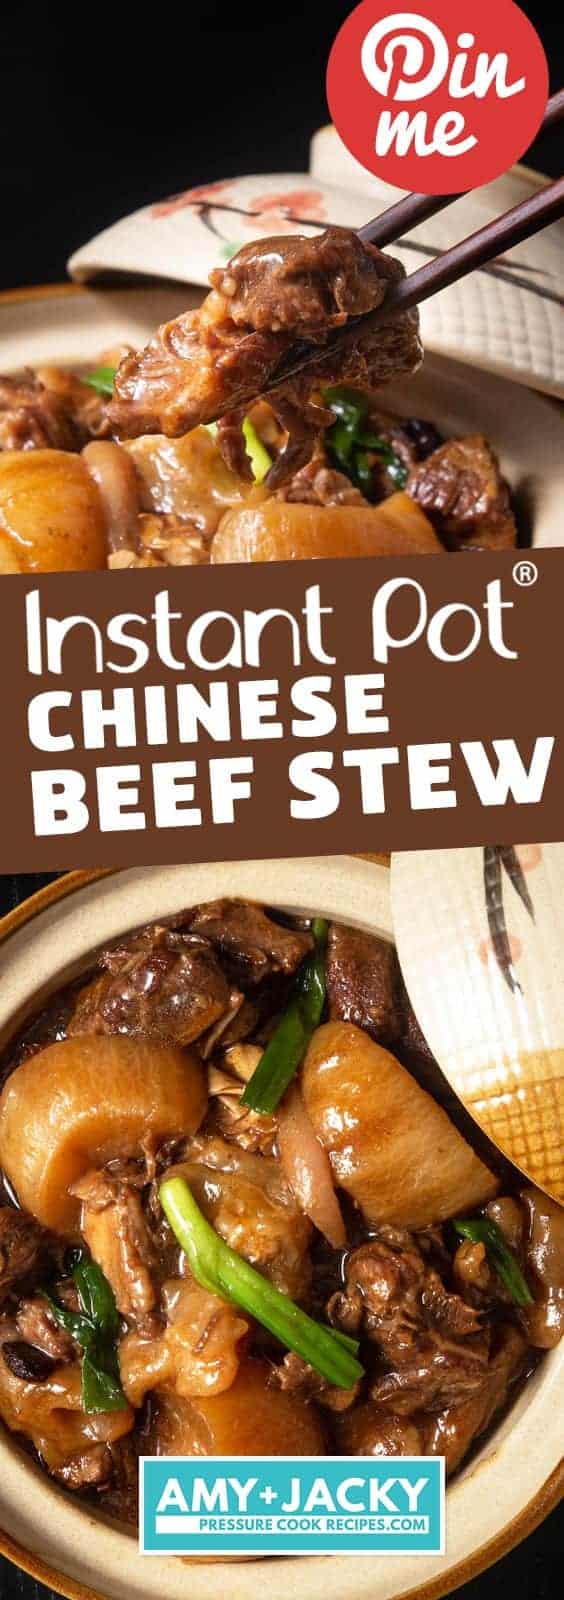 Instant Pot Chinese Beef Stew | Pressure Cooker Chinese Beef Stew | Instant Pot Beef Recipes | Instant Pot Recipes | Beef Brisket Stew | Chinese Beef Brisket | Beef Tendon | Hong Kong Beef Brisket #instantpot #pressurecooker #beef #asian #chinese #dinner #easy